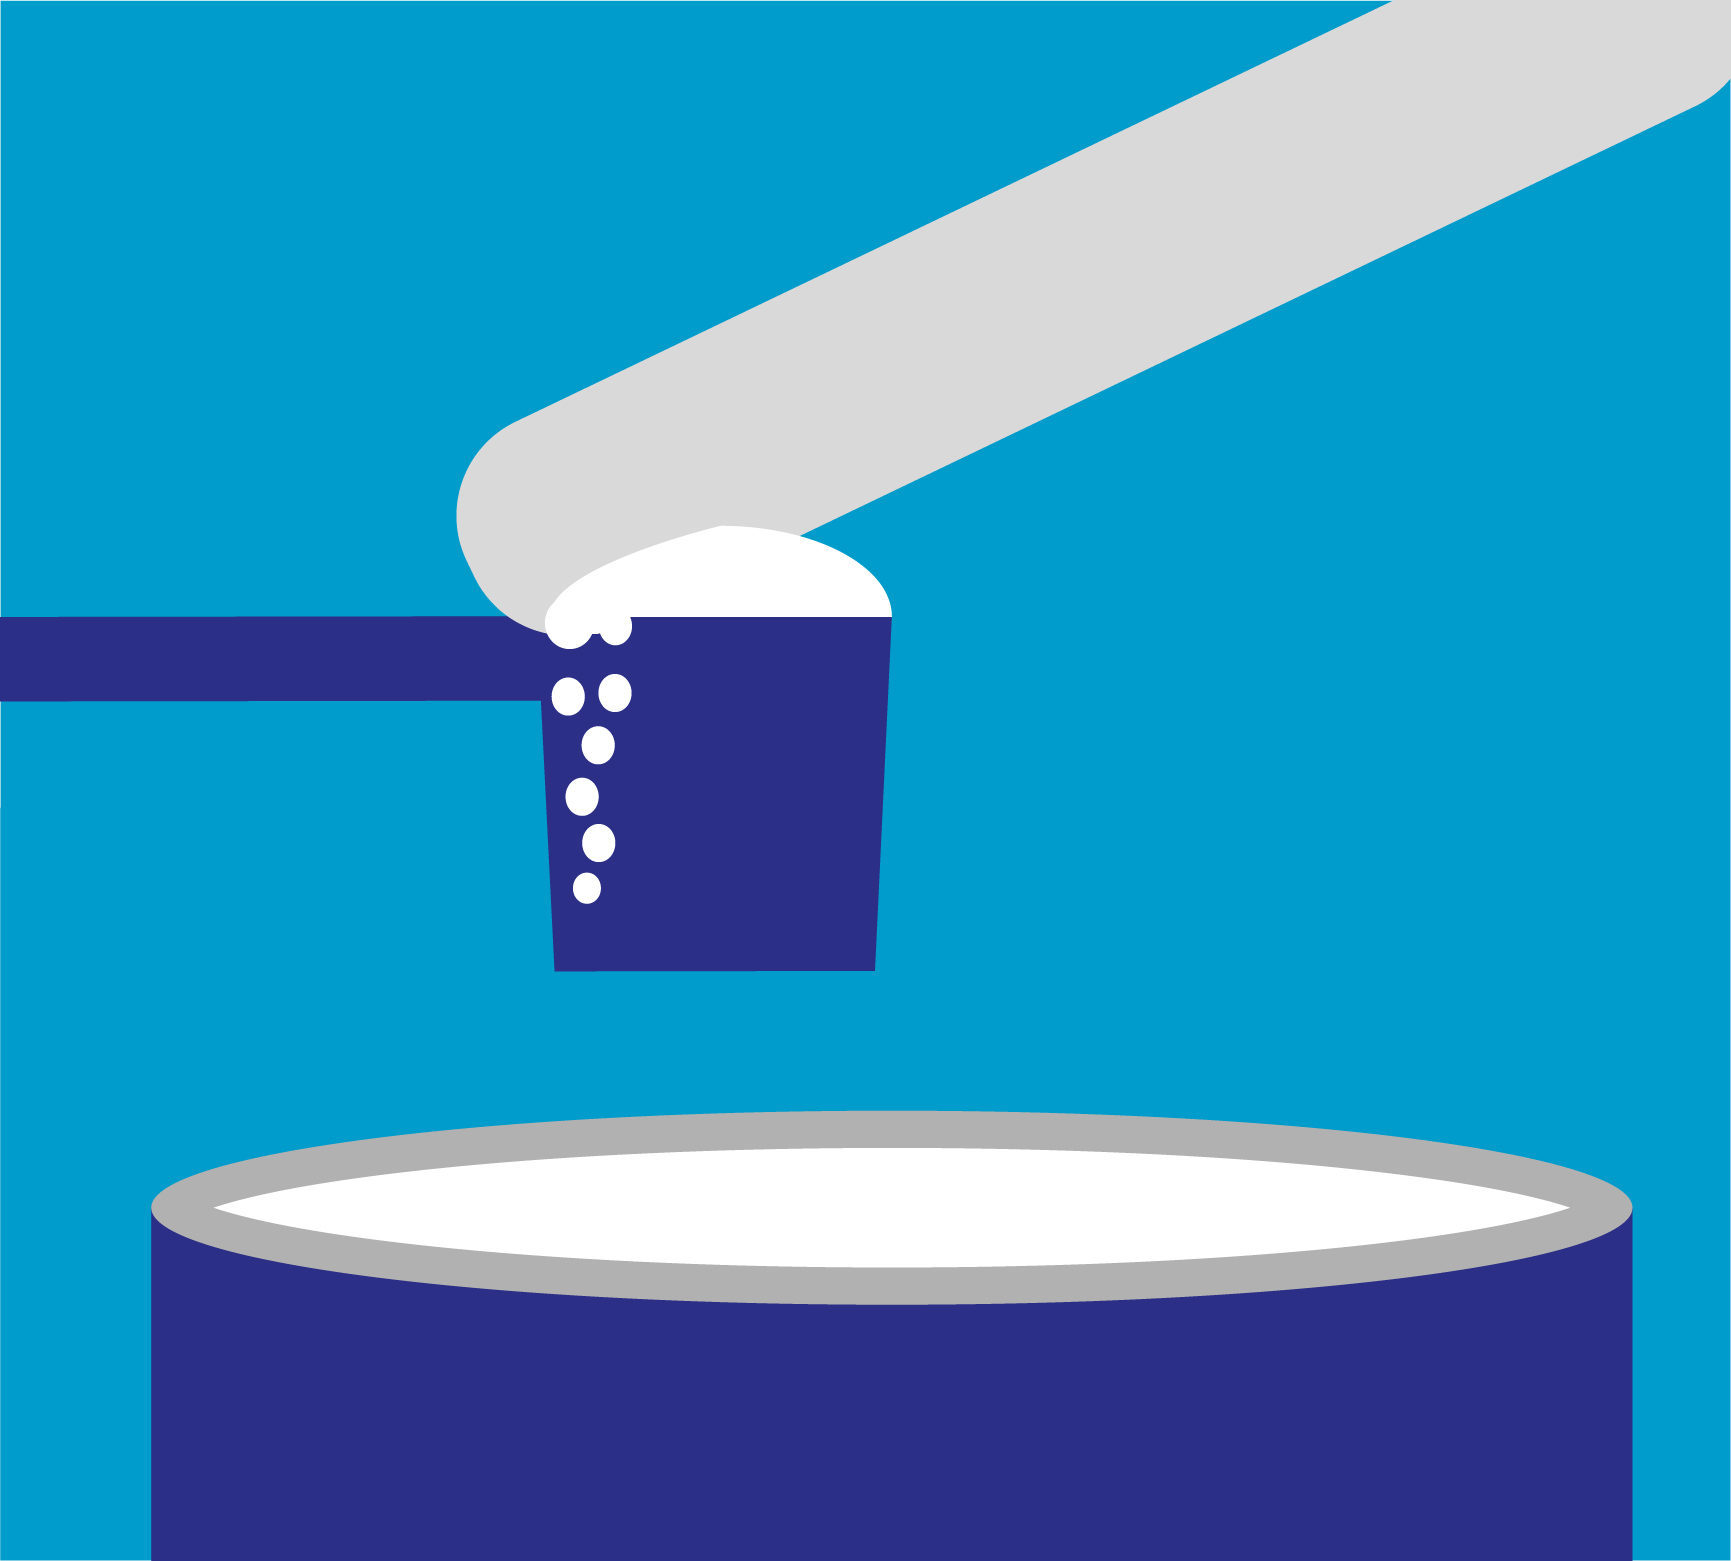 Illustration of person taking off excess powder from measuring cup